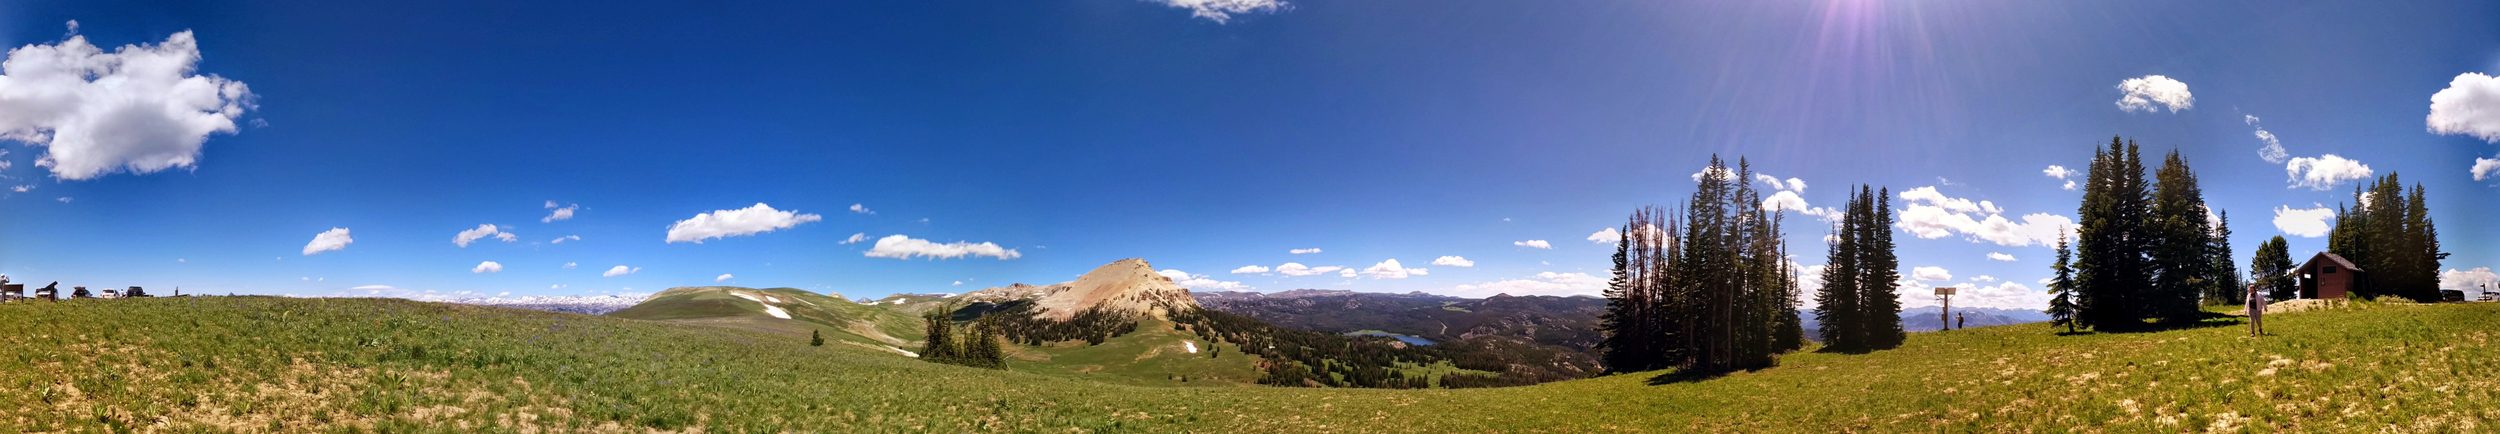 Shoshone National Forest Panorama